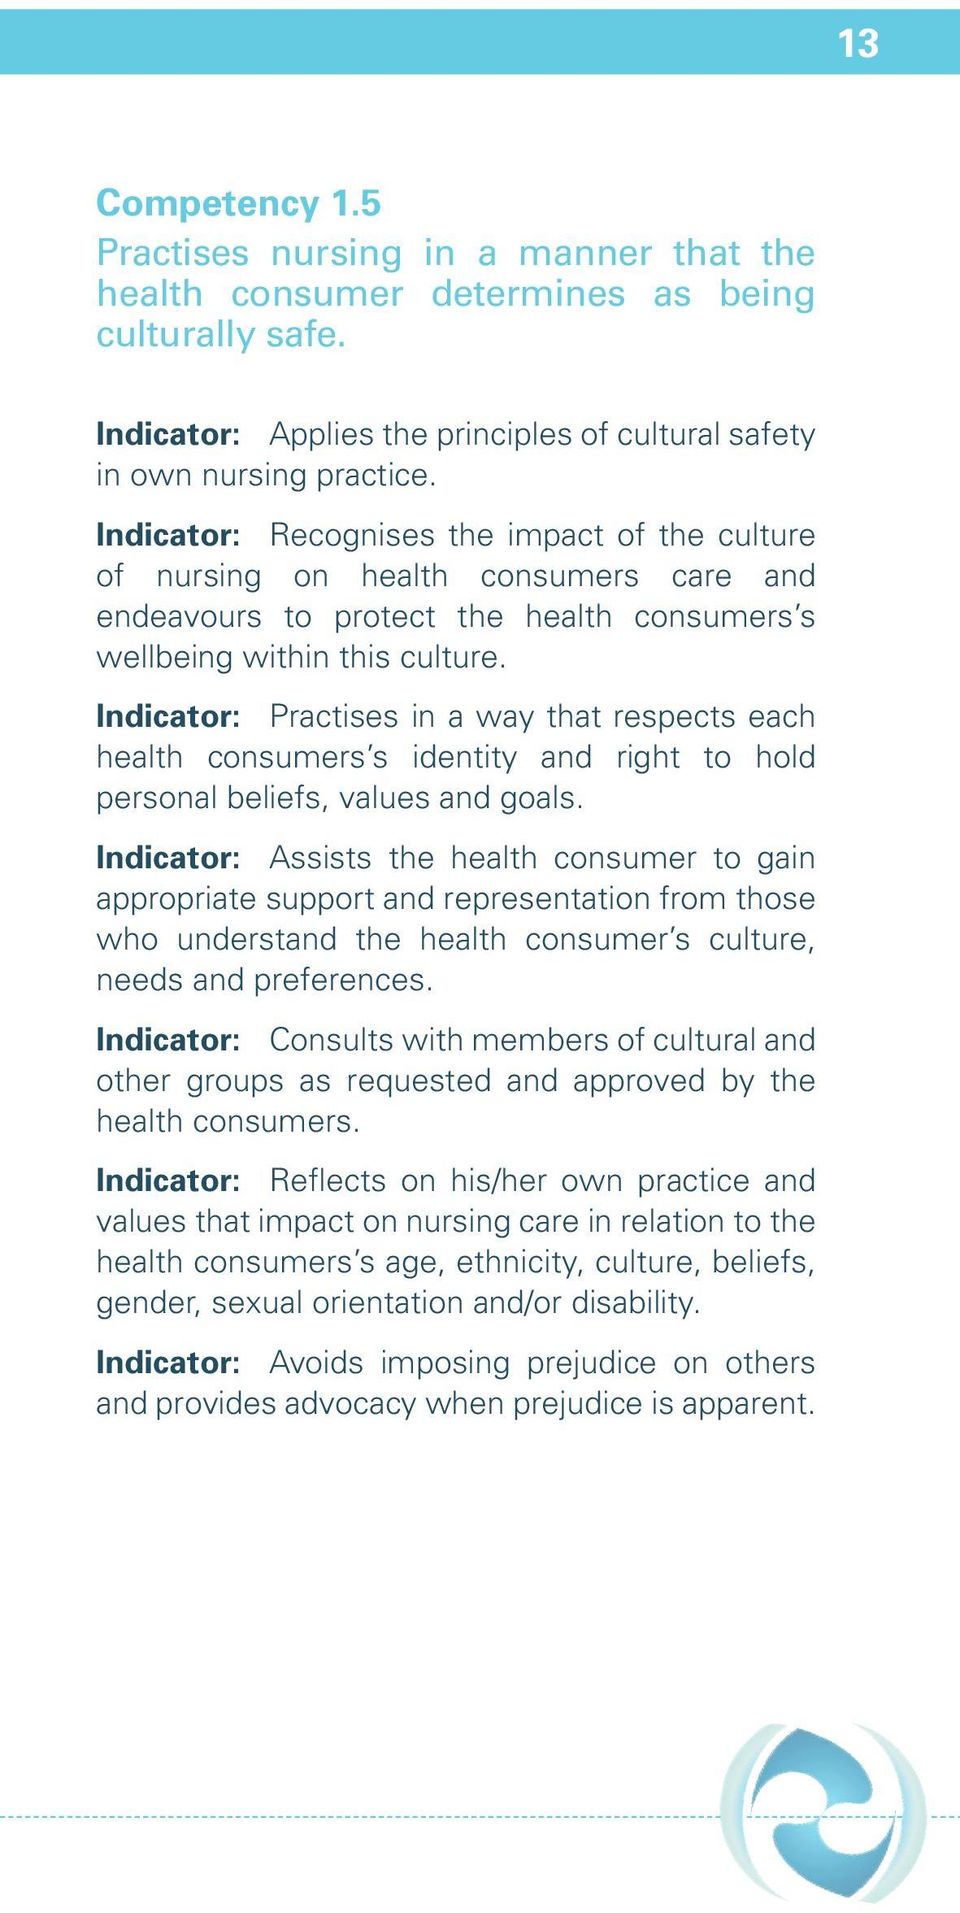 Indicator: Practises in a way that respects each health consumers s identity and right to hold personal beliefs, values and goals.